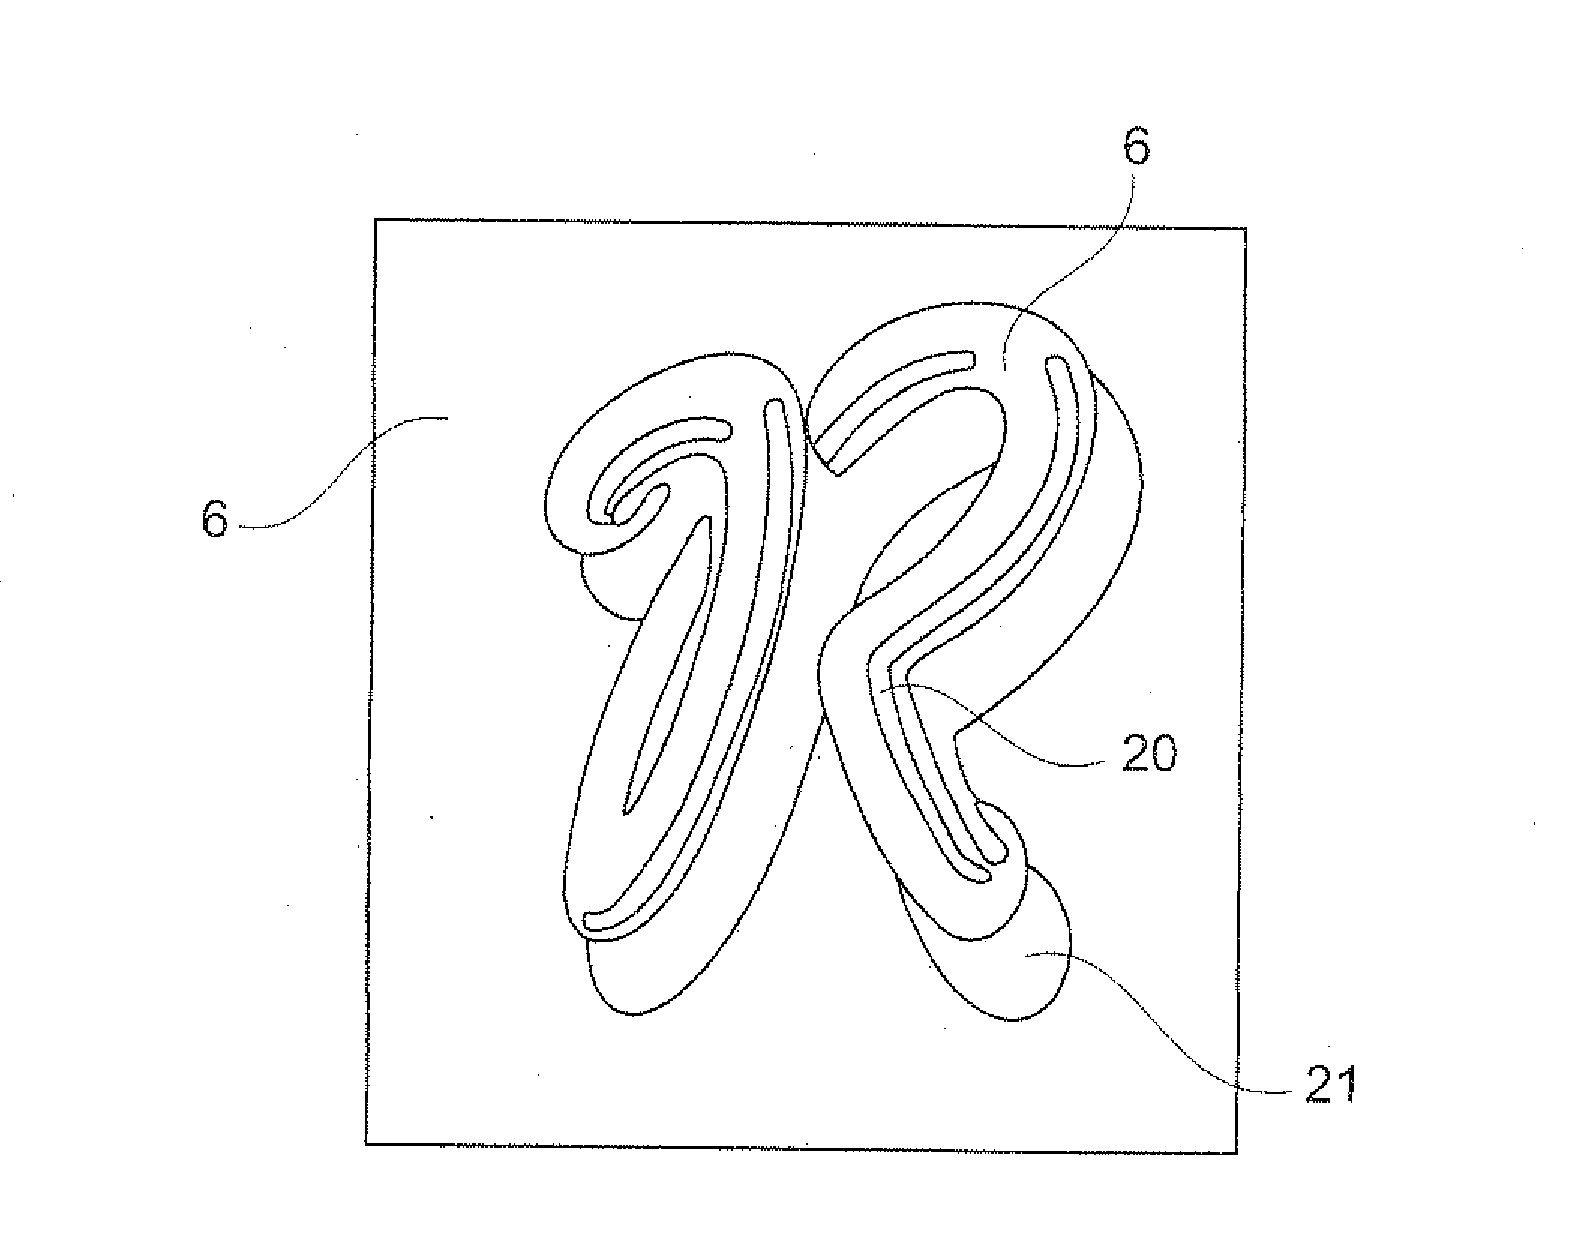 Method for manufacturing a sheet by means of compregnation in order to form an area made transparent